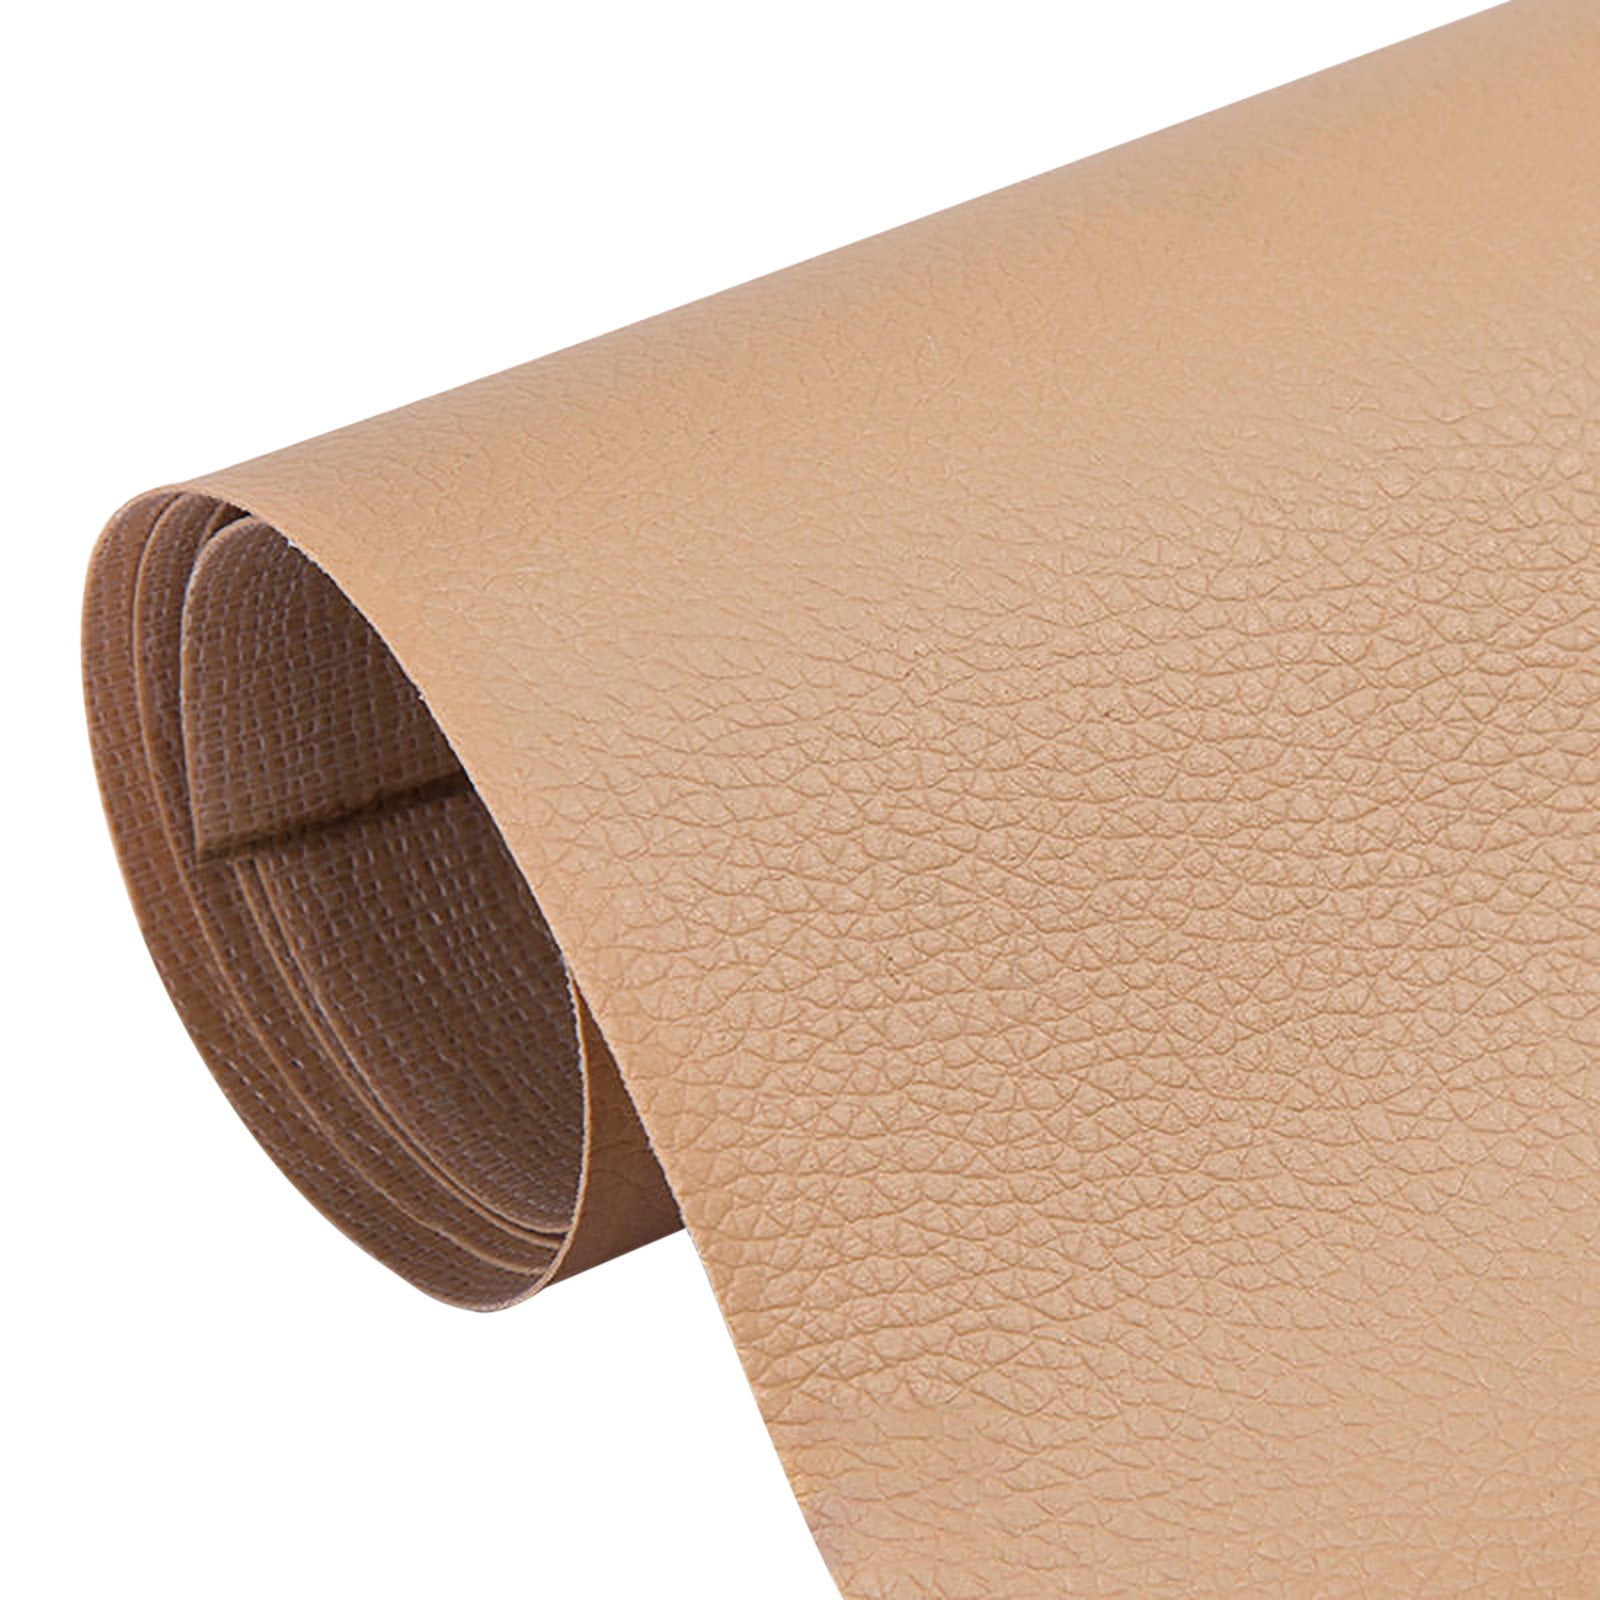 MastaPlasta Instant Leather Repair Tape Beige 60 x 4 in (150cm x 10cm). Self-Adhesive Repair for Sofas, Chairs, Car Seats, Bags and More. Fast, Easy